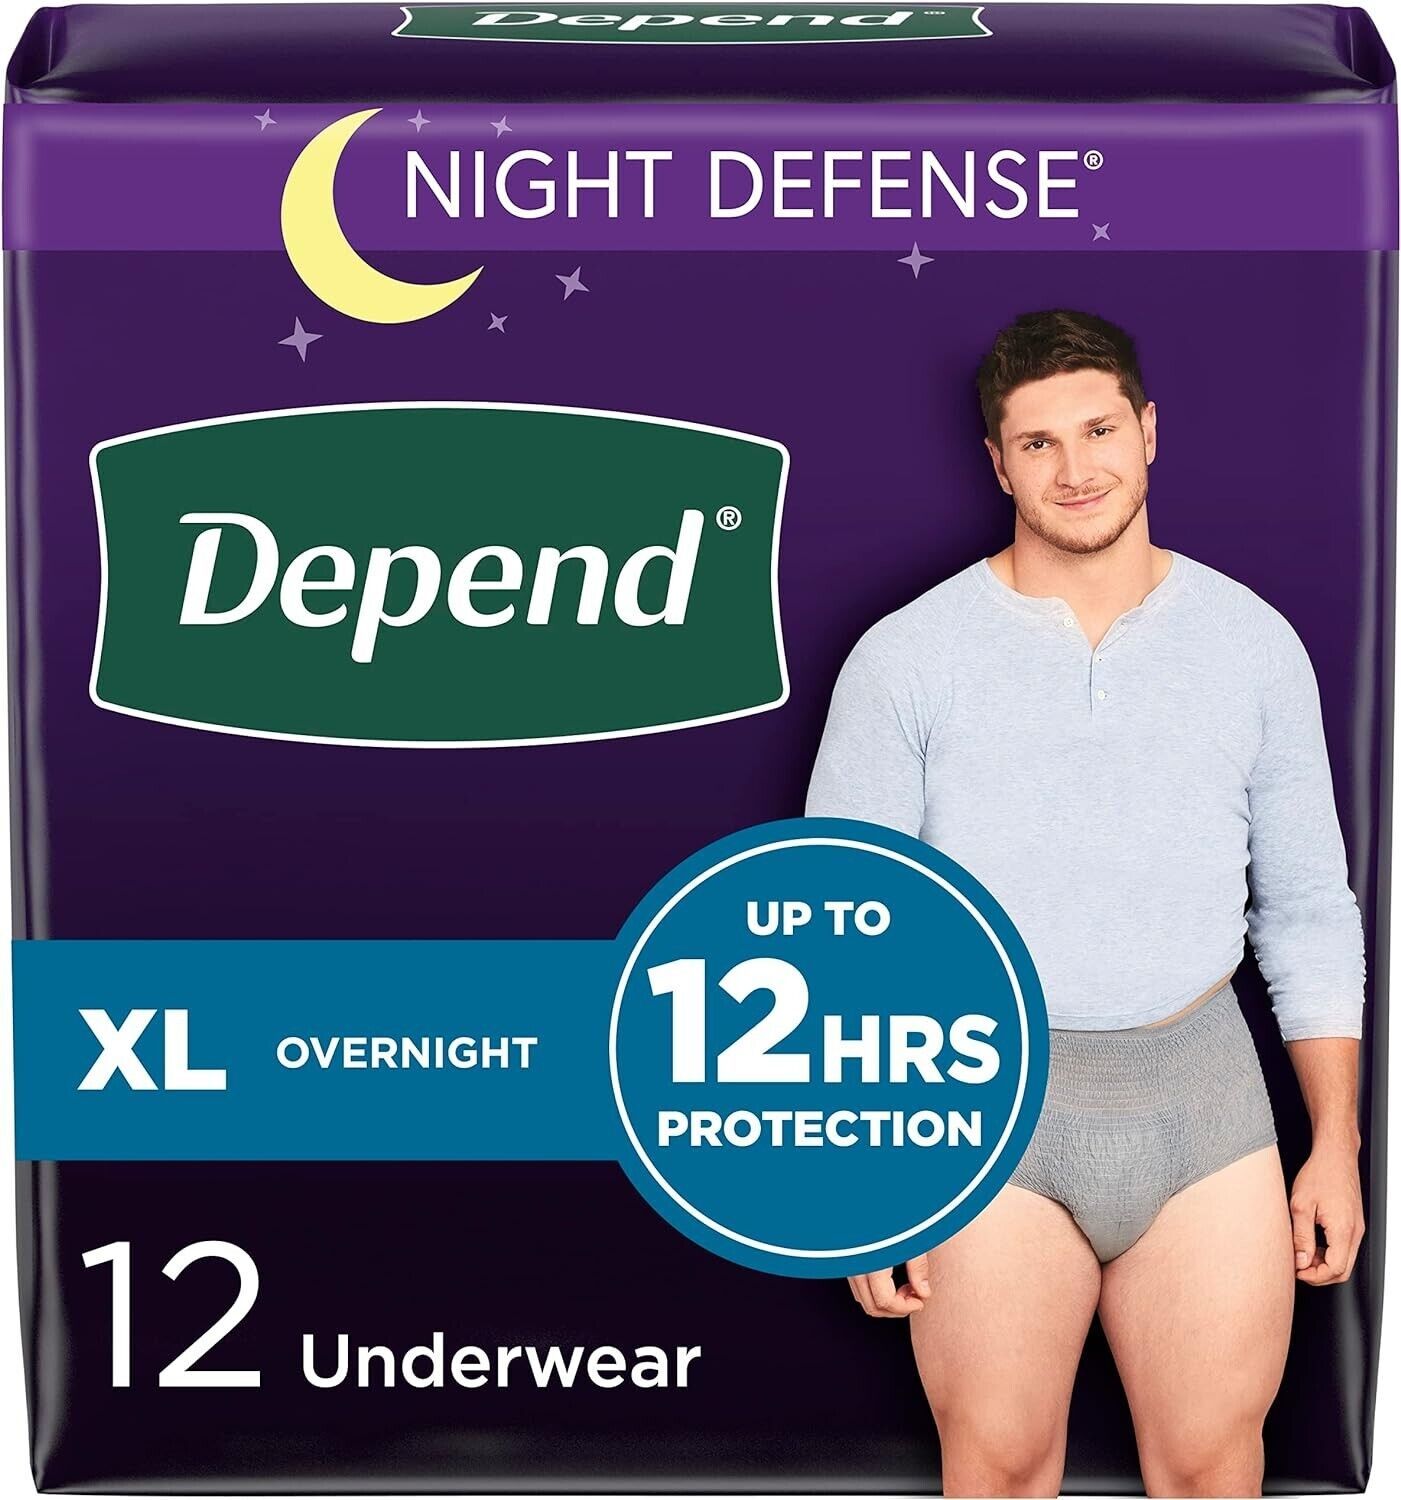 Primary image for Depend Night Defense Overnight Underwear for Men - Size XL, Pack of 12